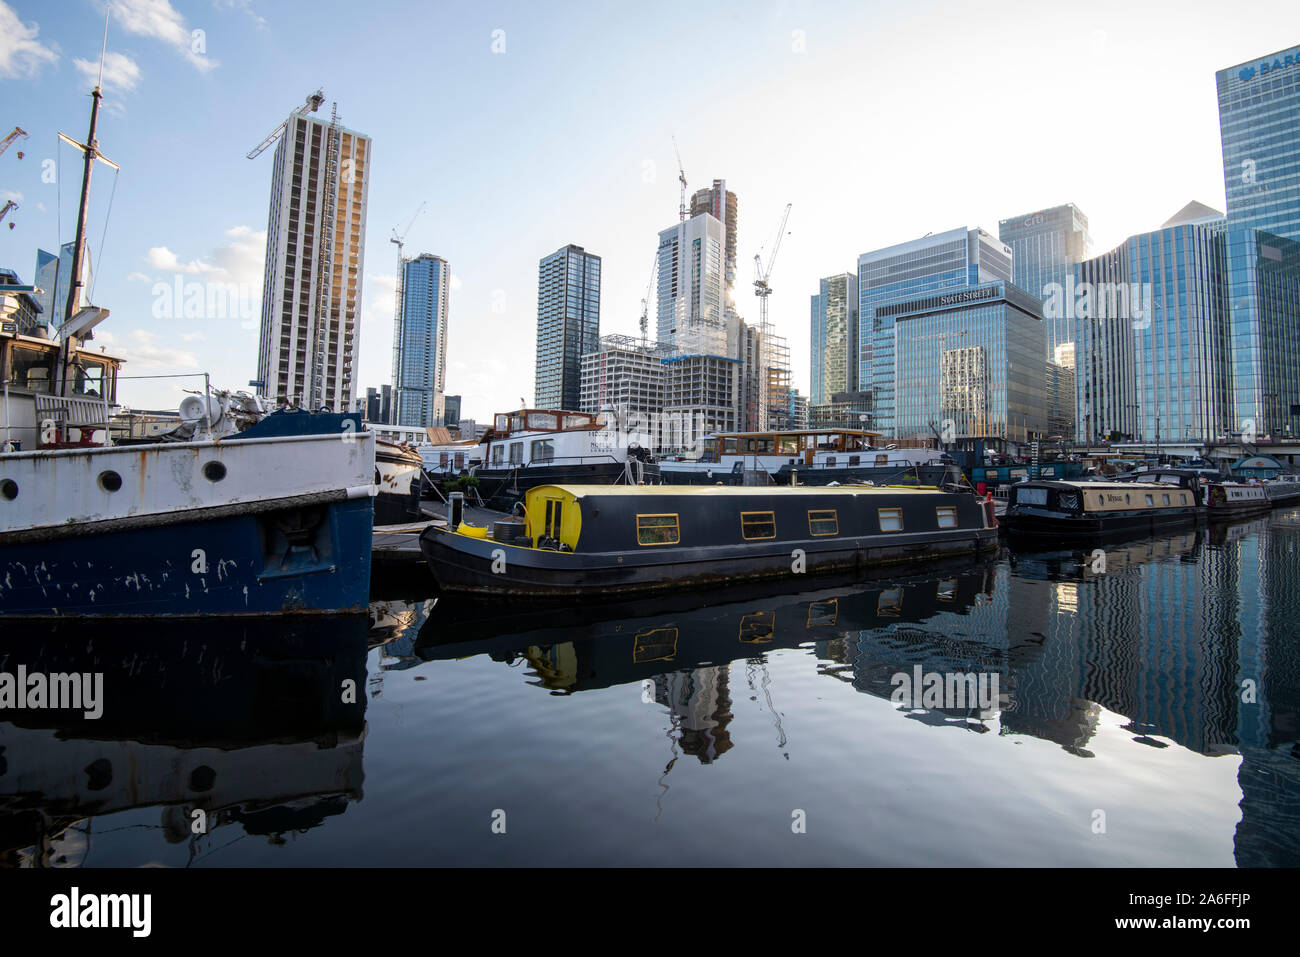 Reflections in the Blackwall Basin looking towards Canary Wharf in London, England UK Stock Photo